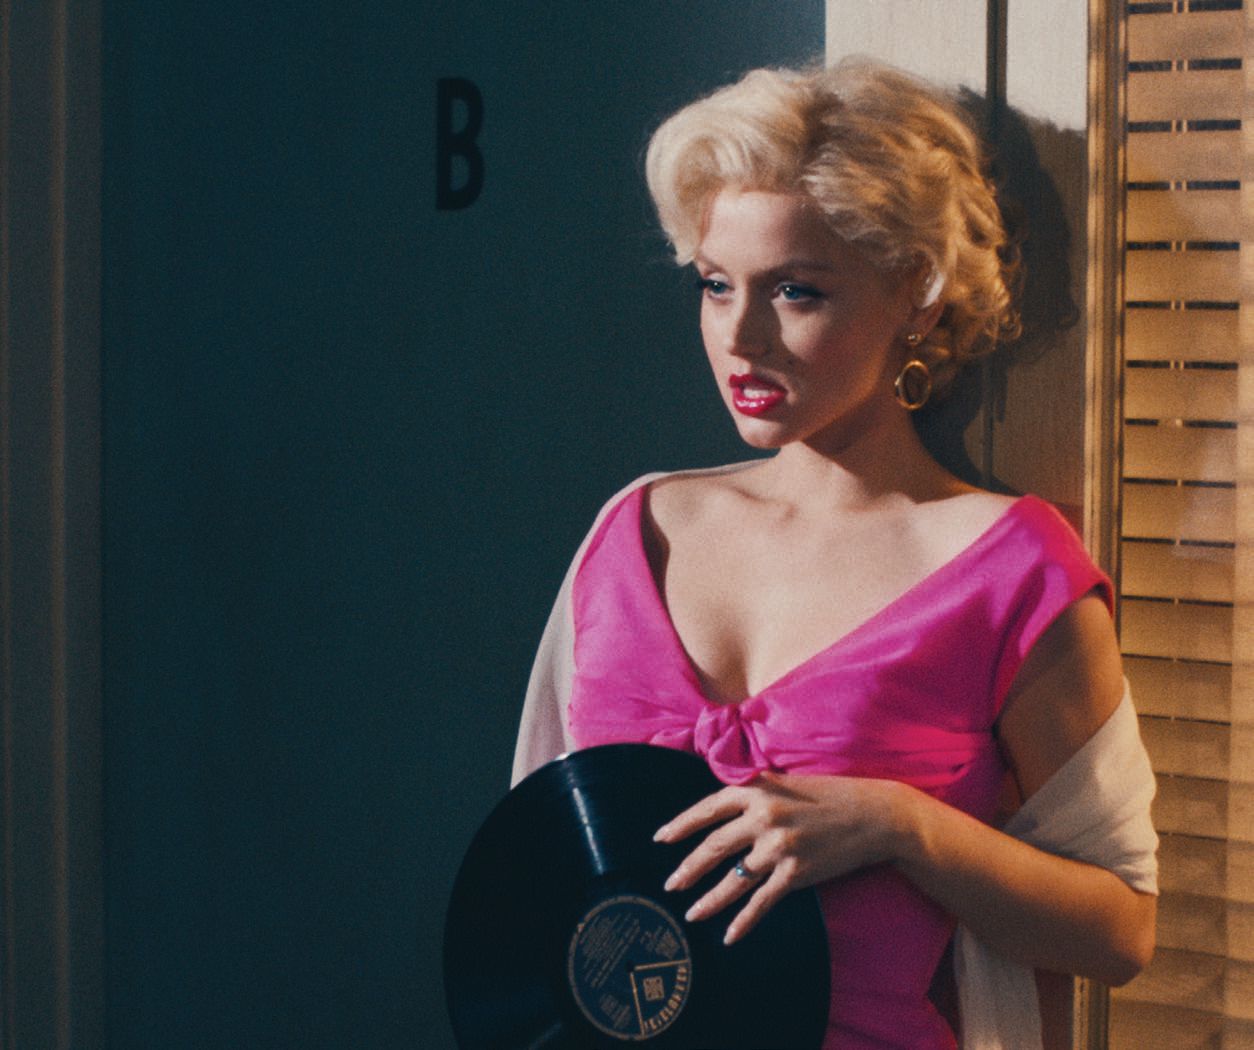 Ana de Armas offers a glimpse into Marilyn Monroe’s inner life in Blonde PHOTO: COURTESY OF NETFLIX